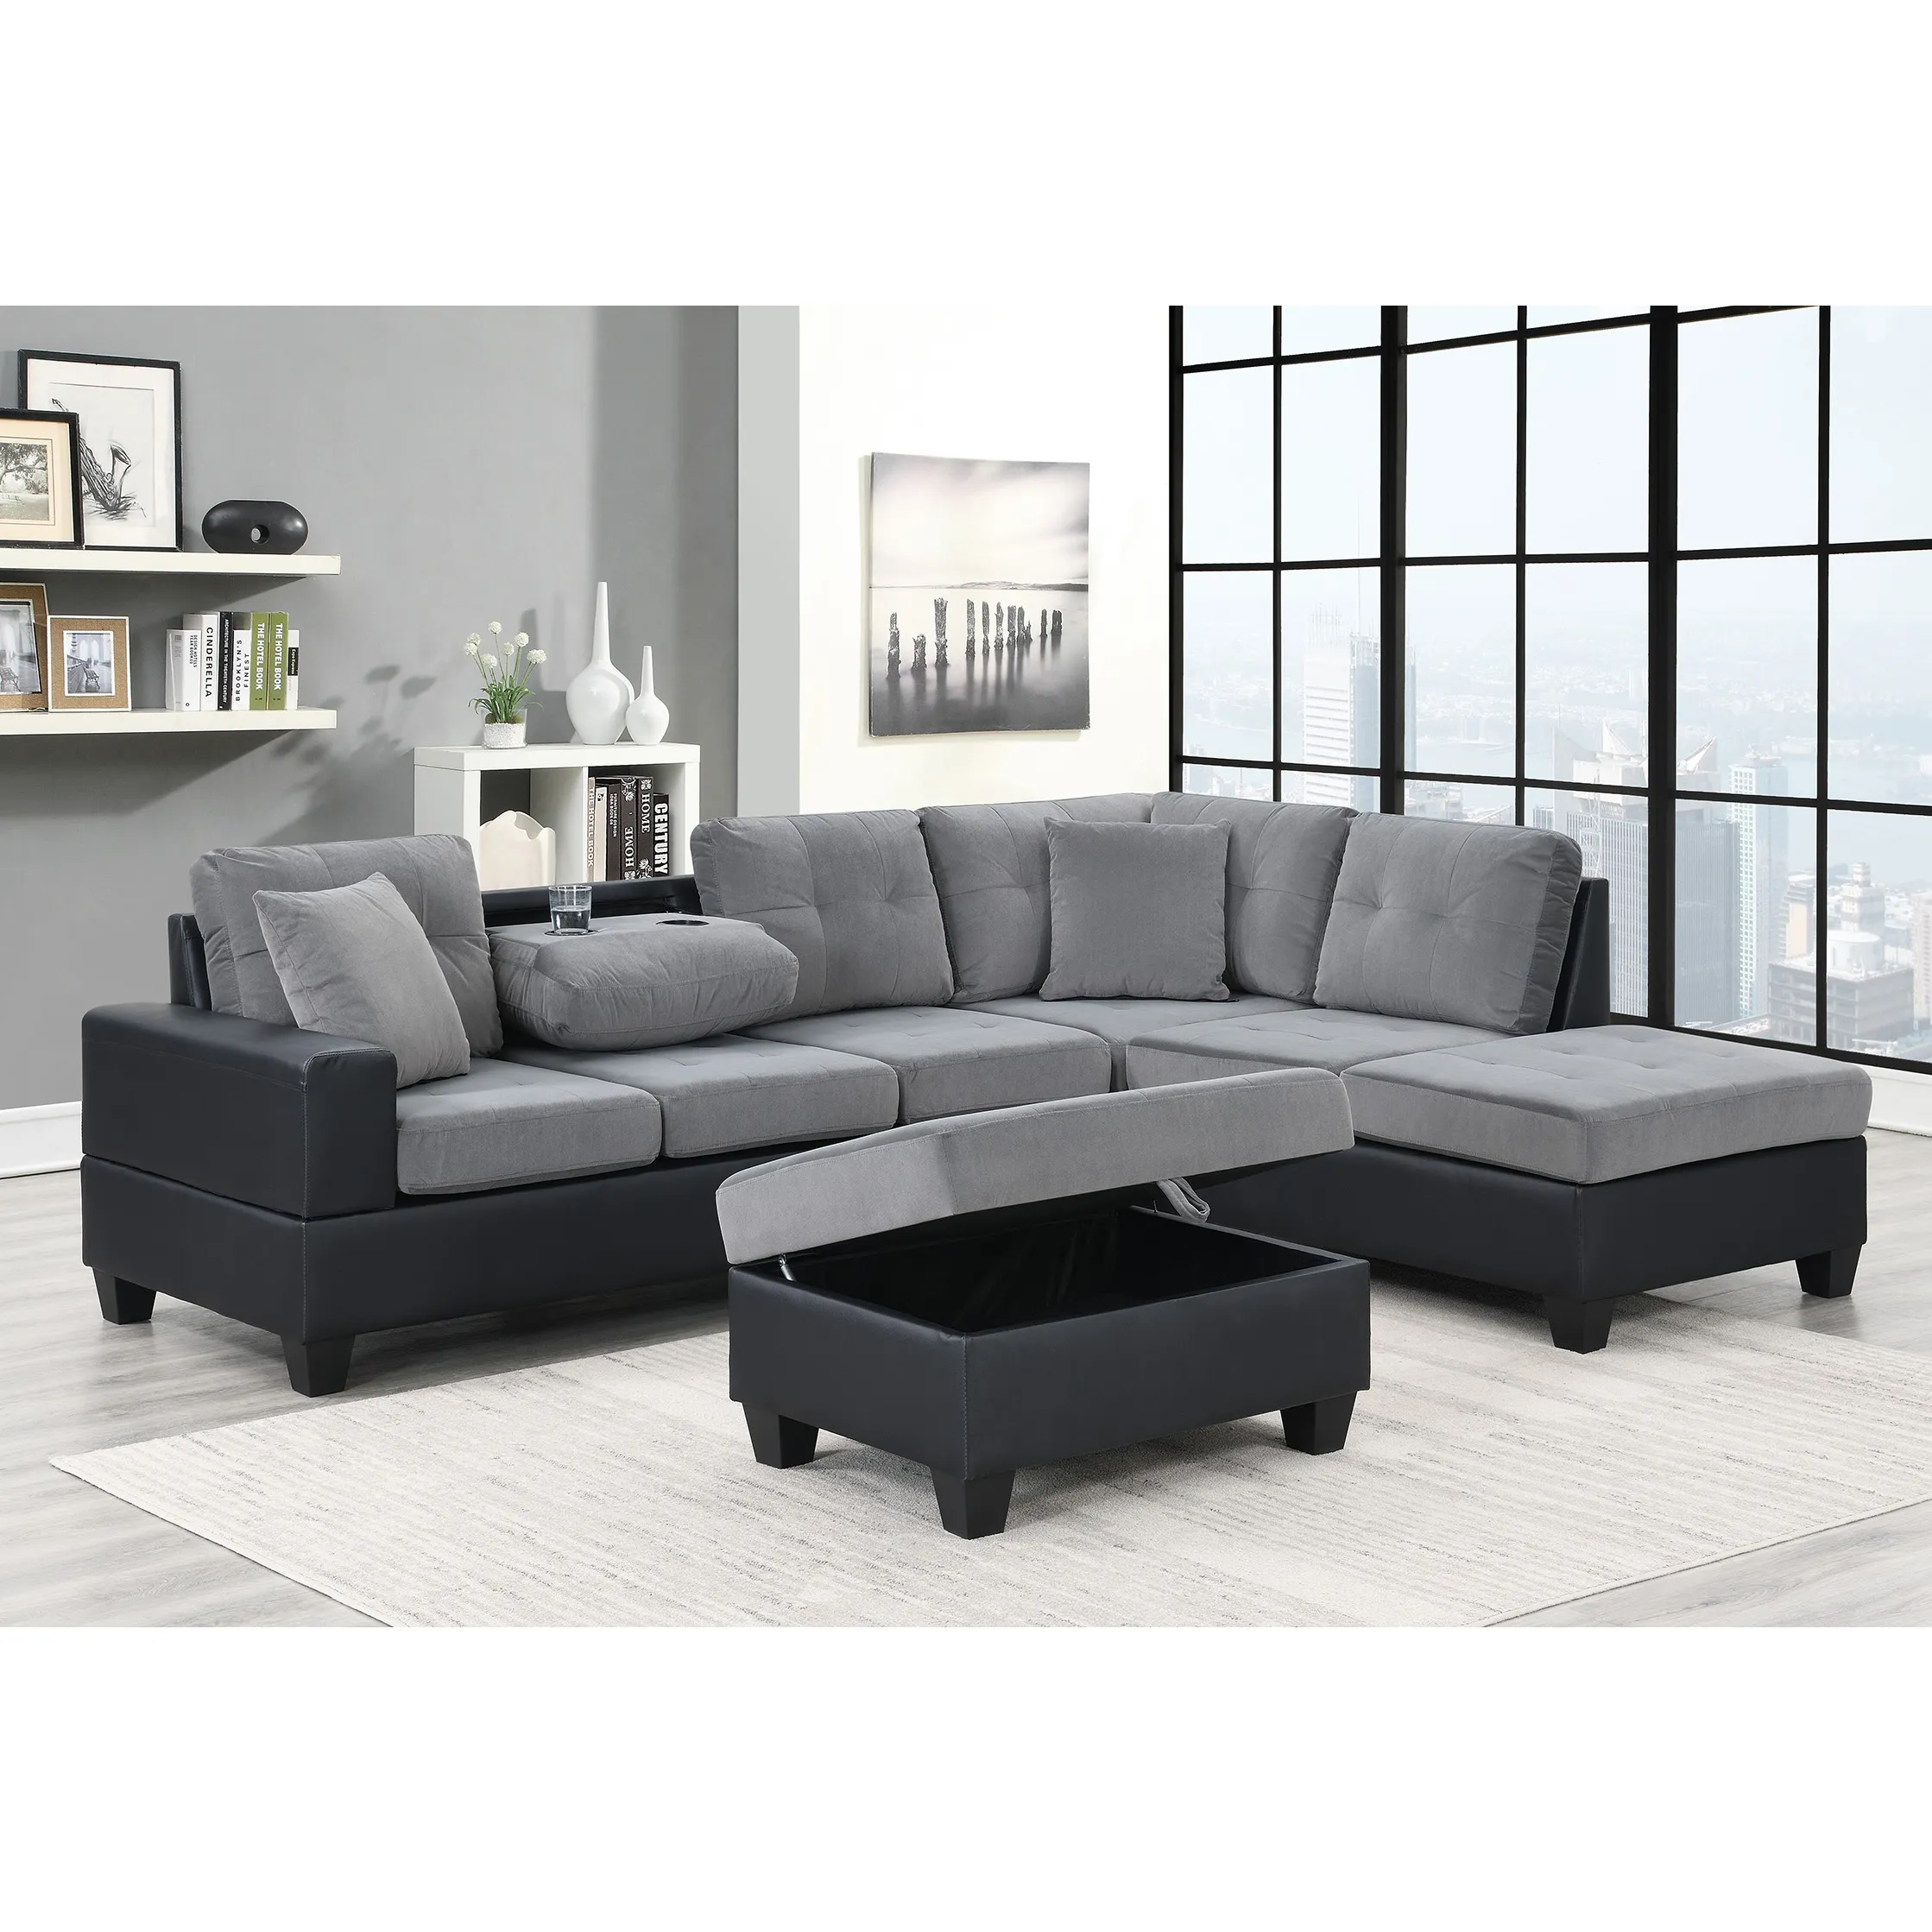 New arrival living room sofa super modern style living room furniture LED lamps top-end quality couch living room sectional sofa